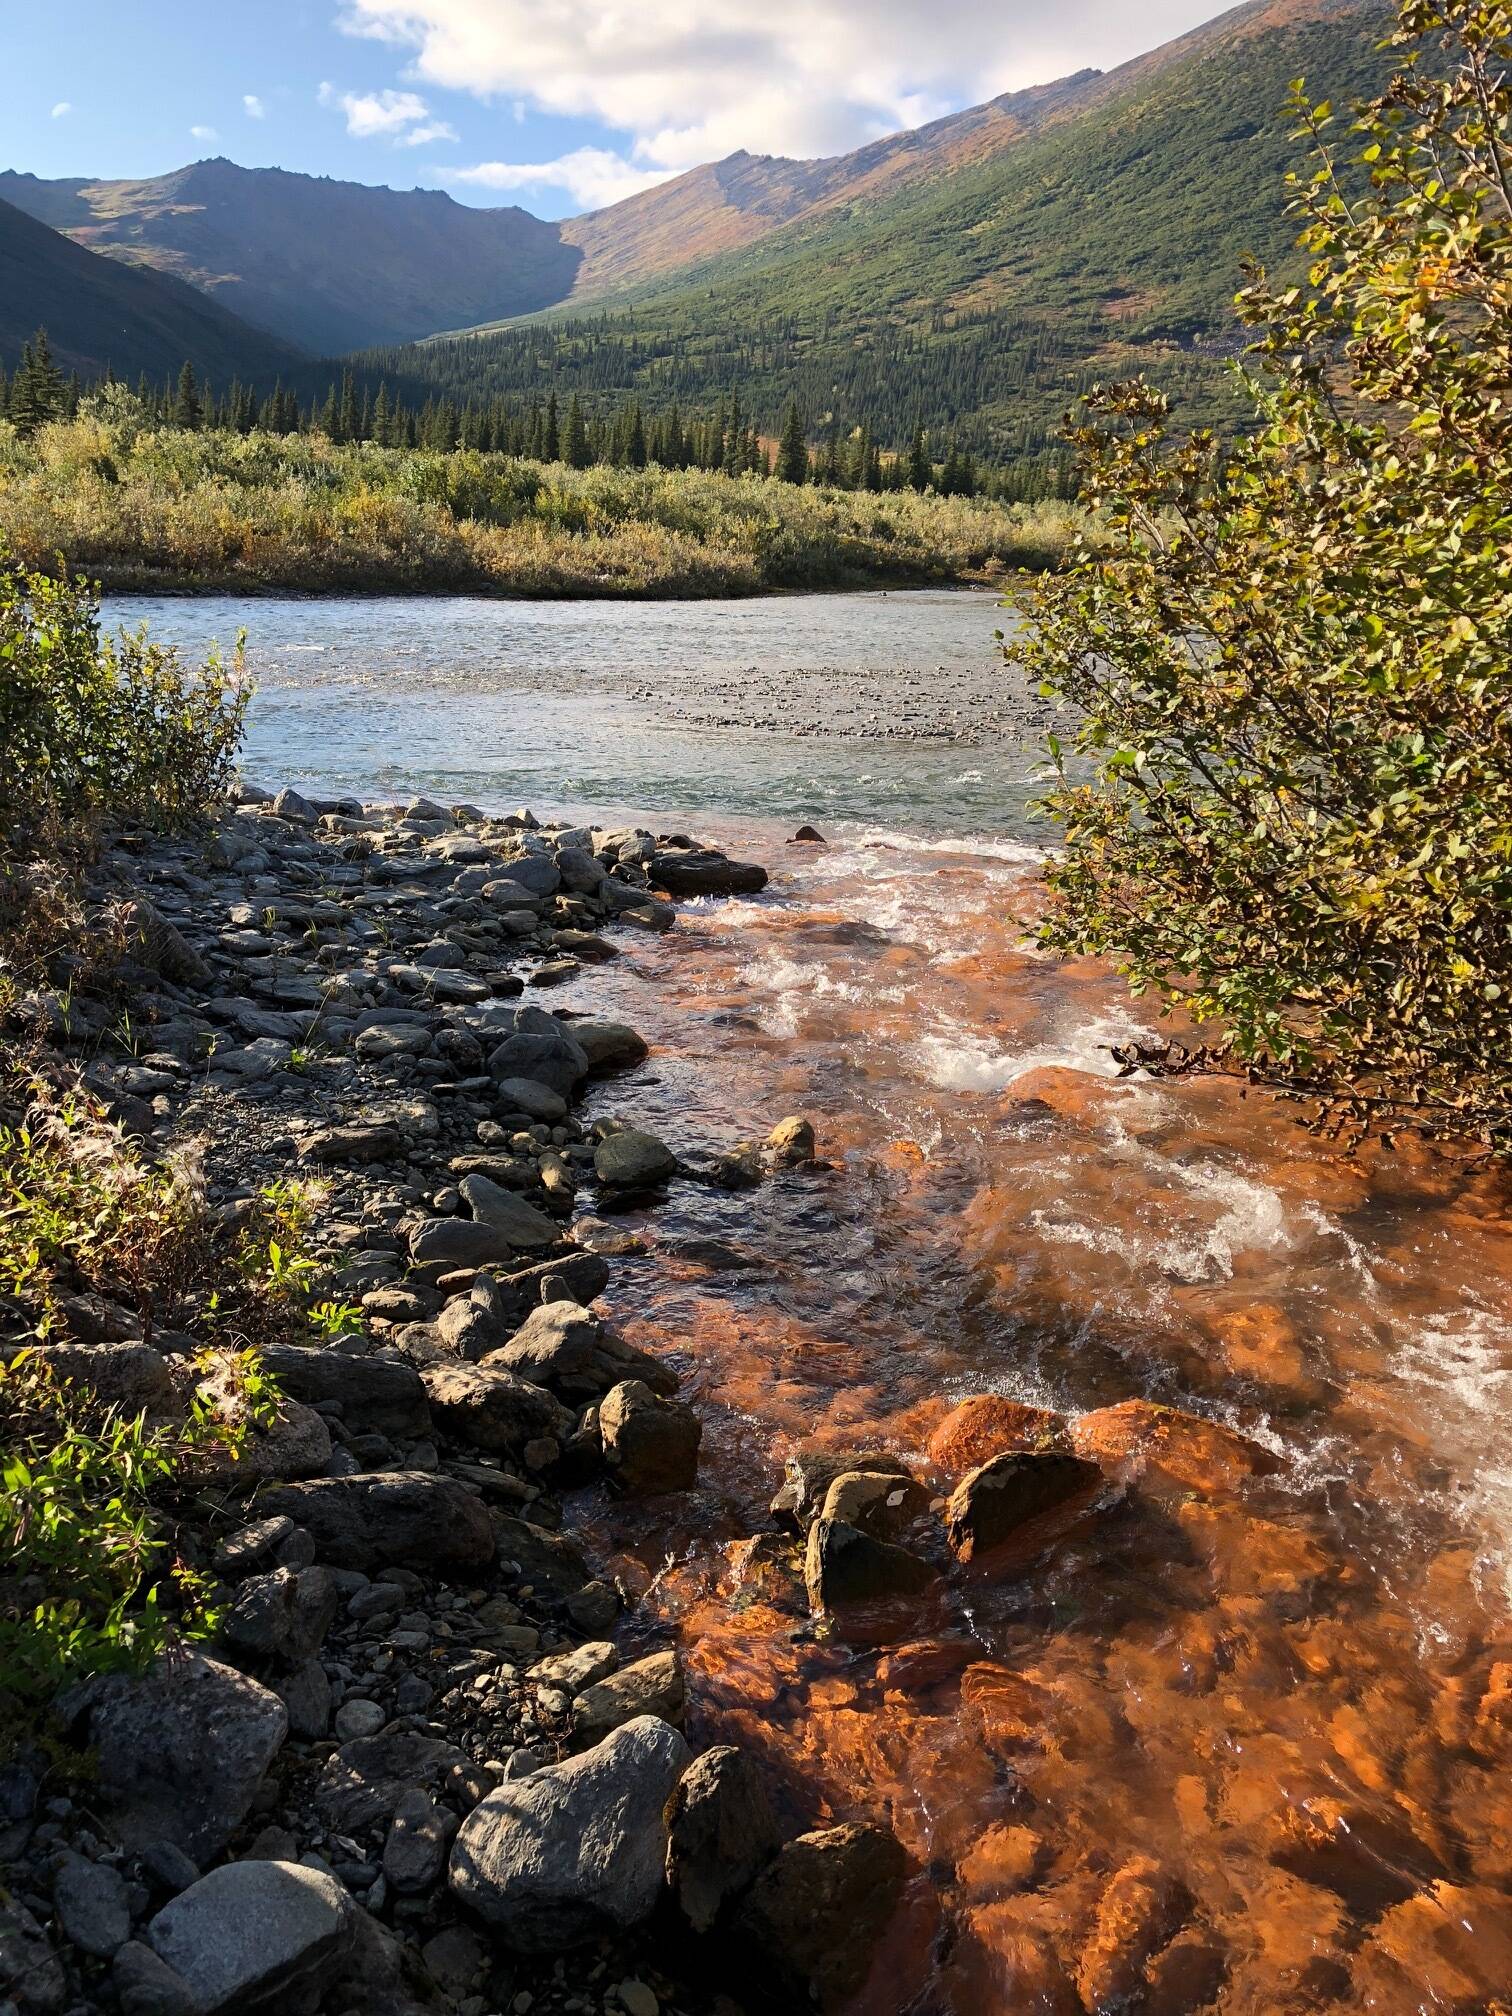 A tributary of the Akillik River in Kobuk Valley National Park in August 2018 after it had turned rusty orange. (Photo by Jon O’Donnell)